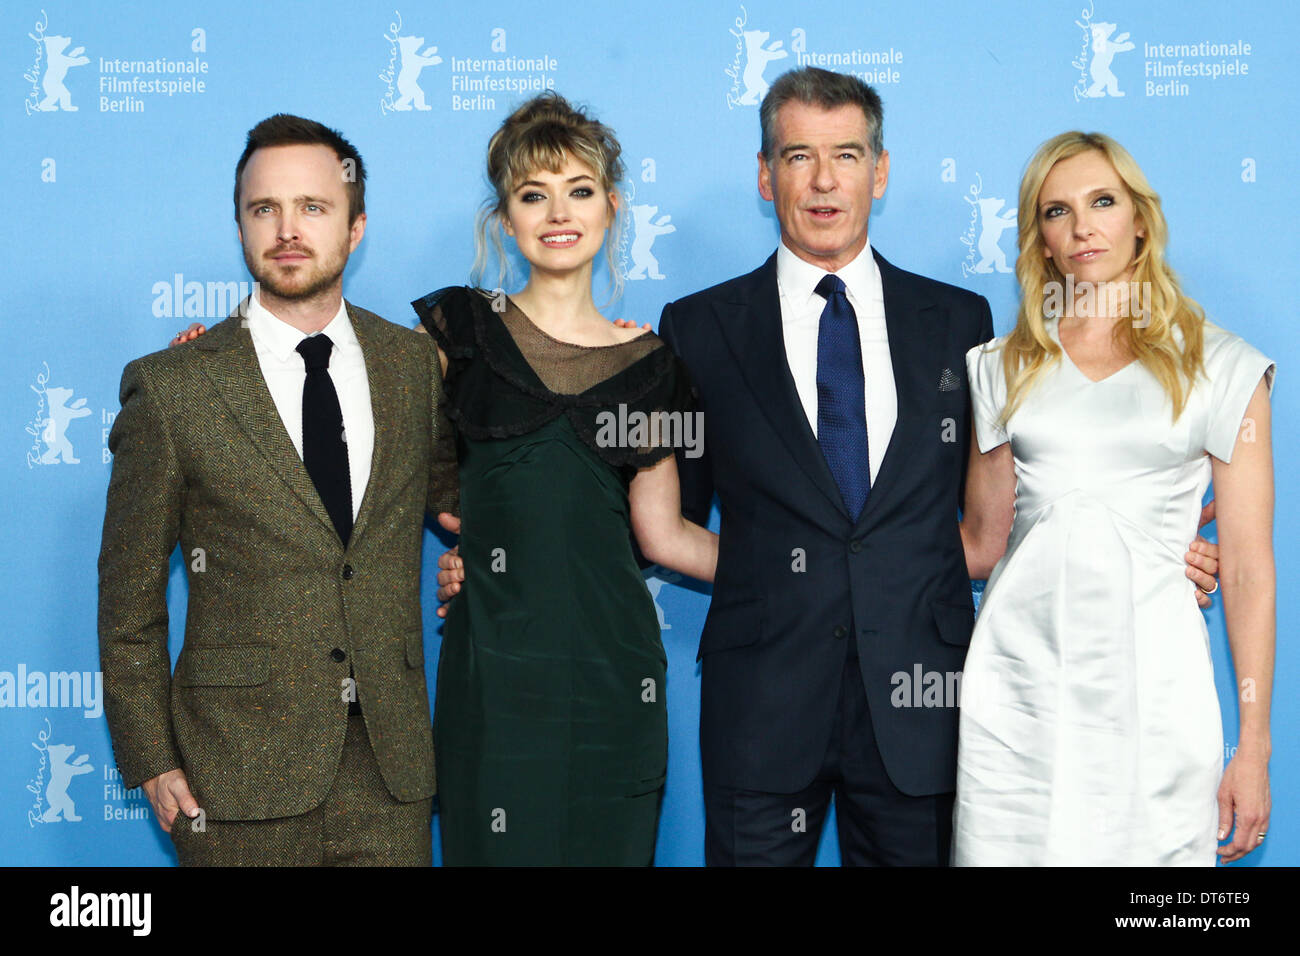 Berlin, Germany. 10th Feb, 2013. (L-R) Aaron Paul, Imogen Poots, Pierce Brosnan and Toni Collette pose for photos during a photocall to promote the movie 'A Long Way Down' at the 64th Berlinale International Film Festival in Berlin, Germany, on Feb. 10, 2013. Credit:  Zhang Fan/Xinhua/Alamy Live News Stock Photo